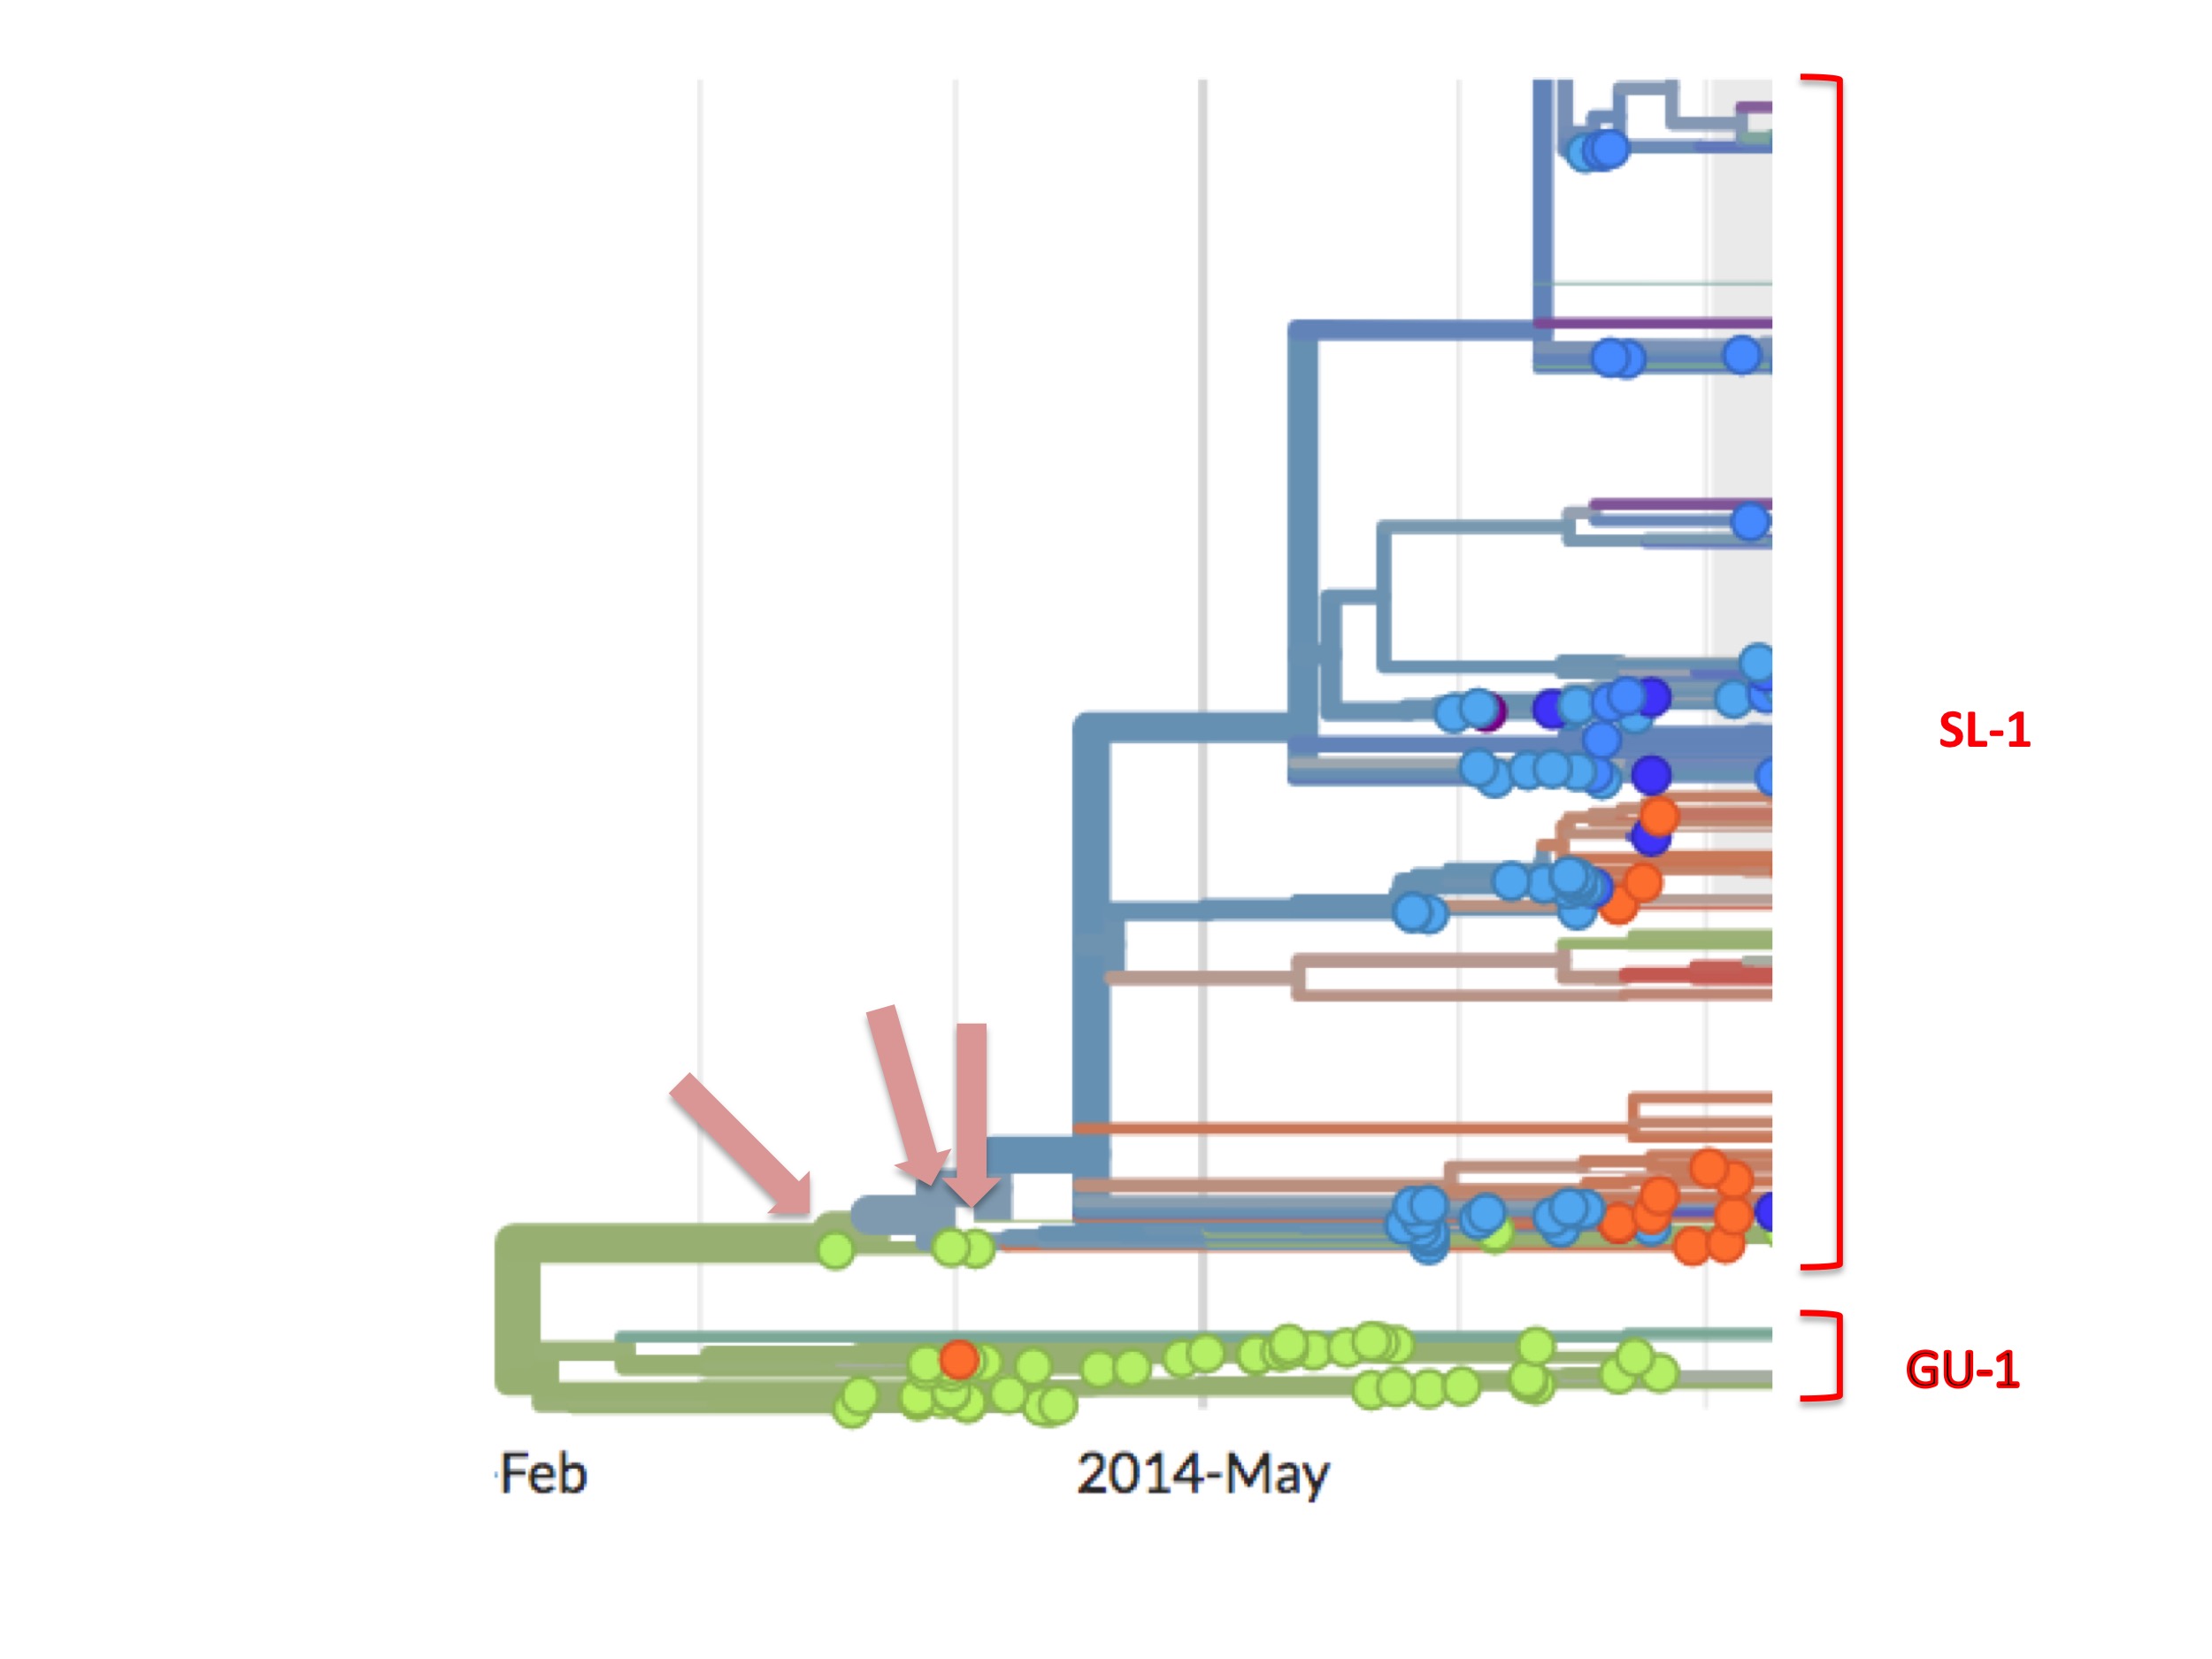 Ebola 2014: The three pink arrows point to the three Guinea genome sequences at the base of the SL-1 lineage.